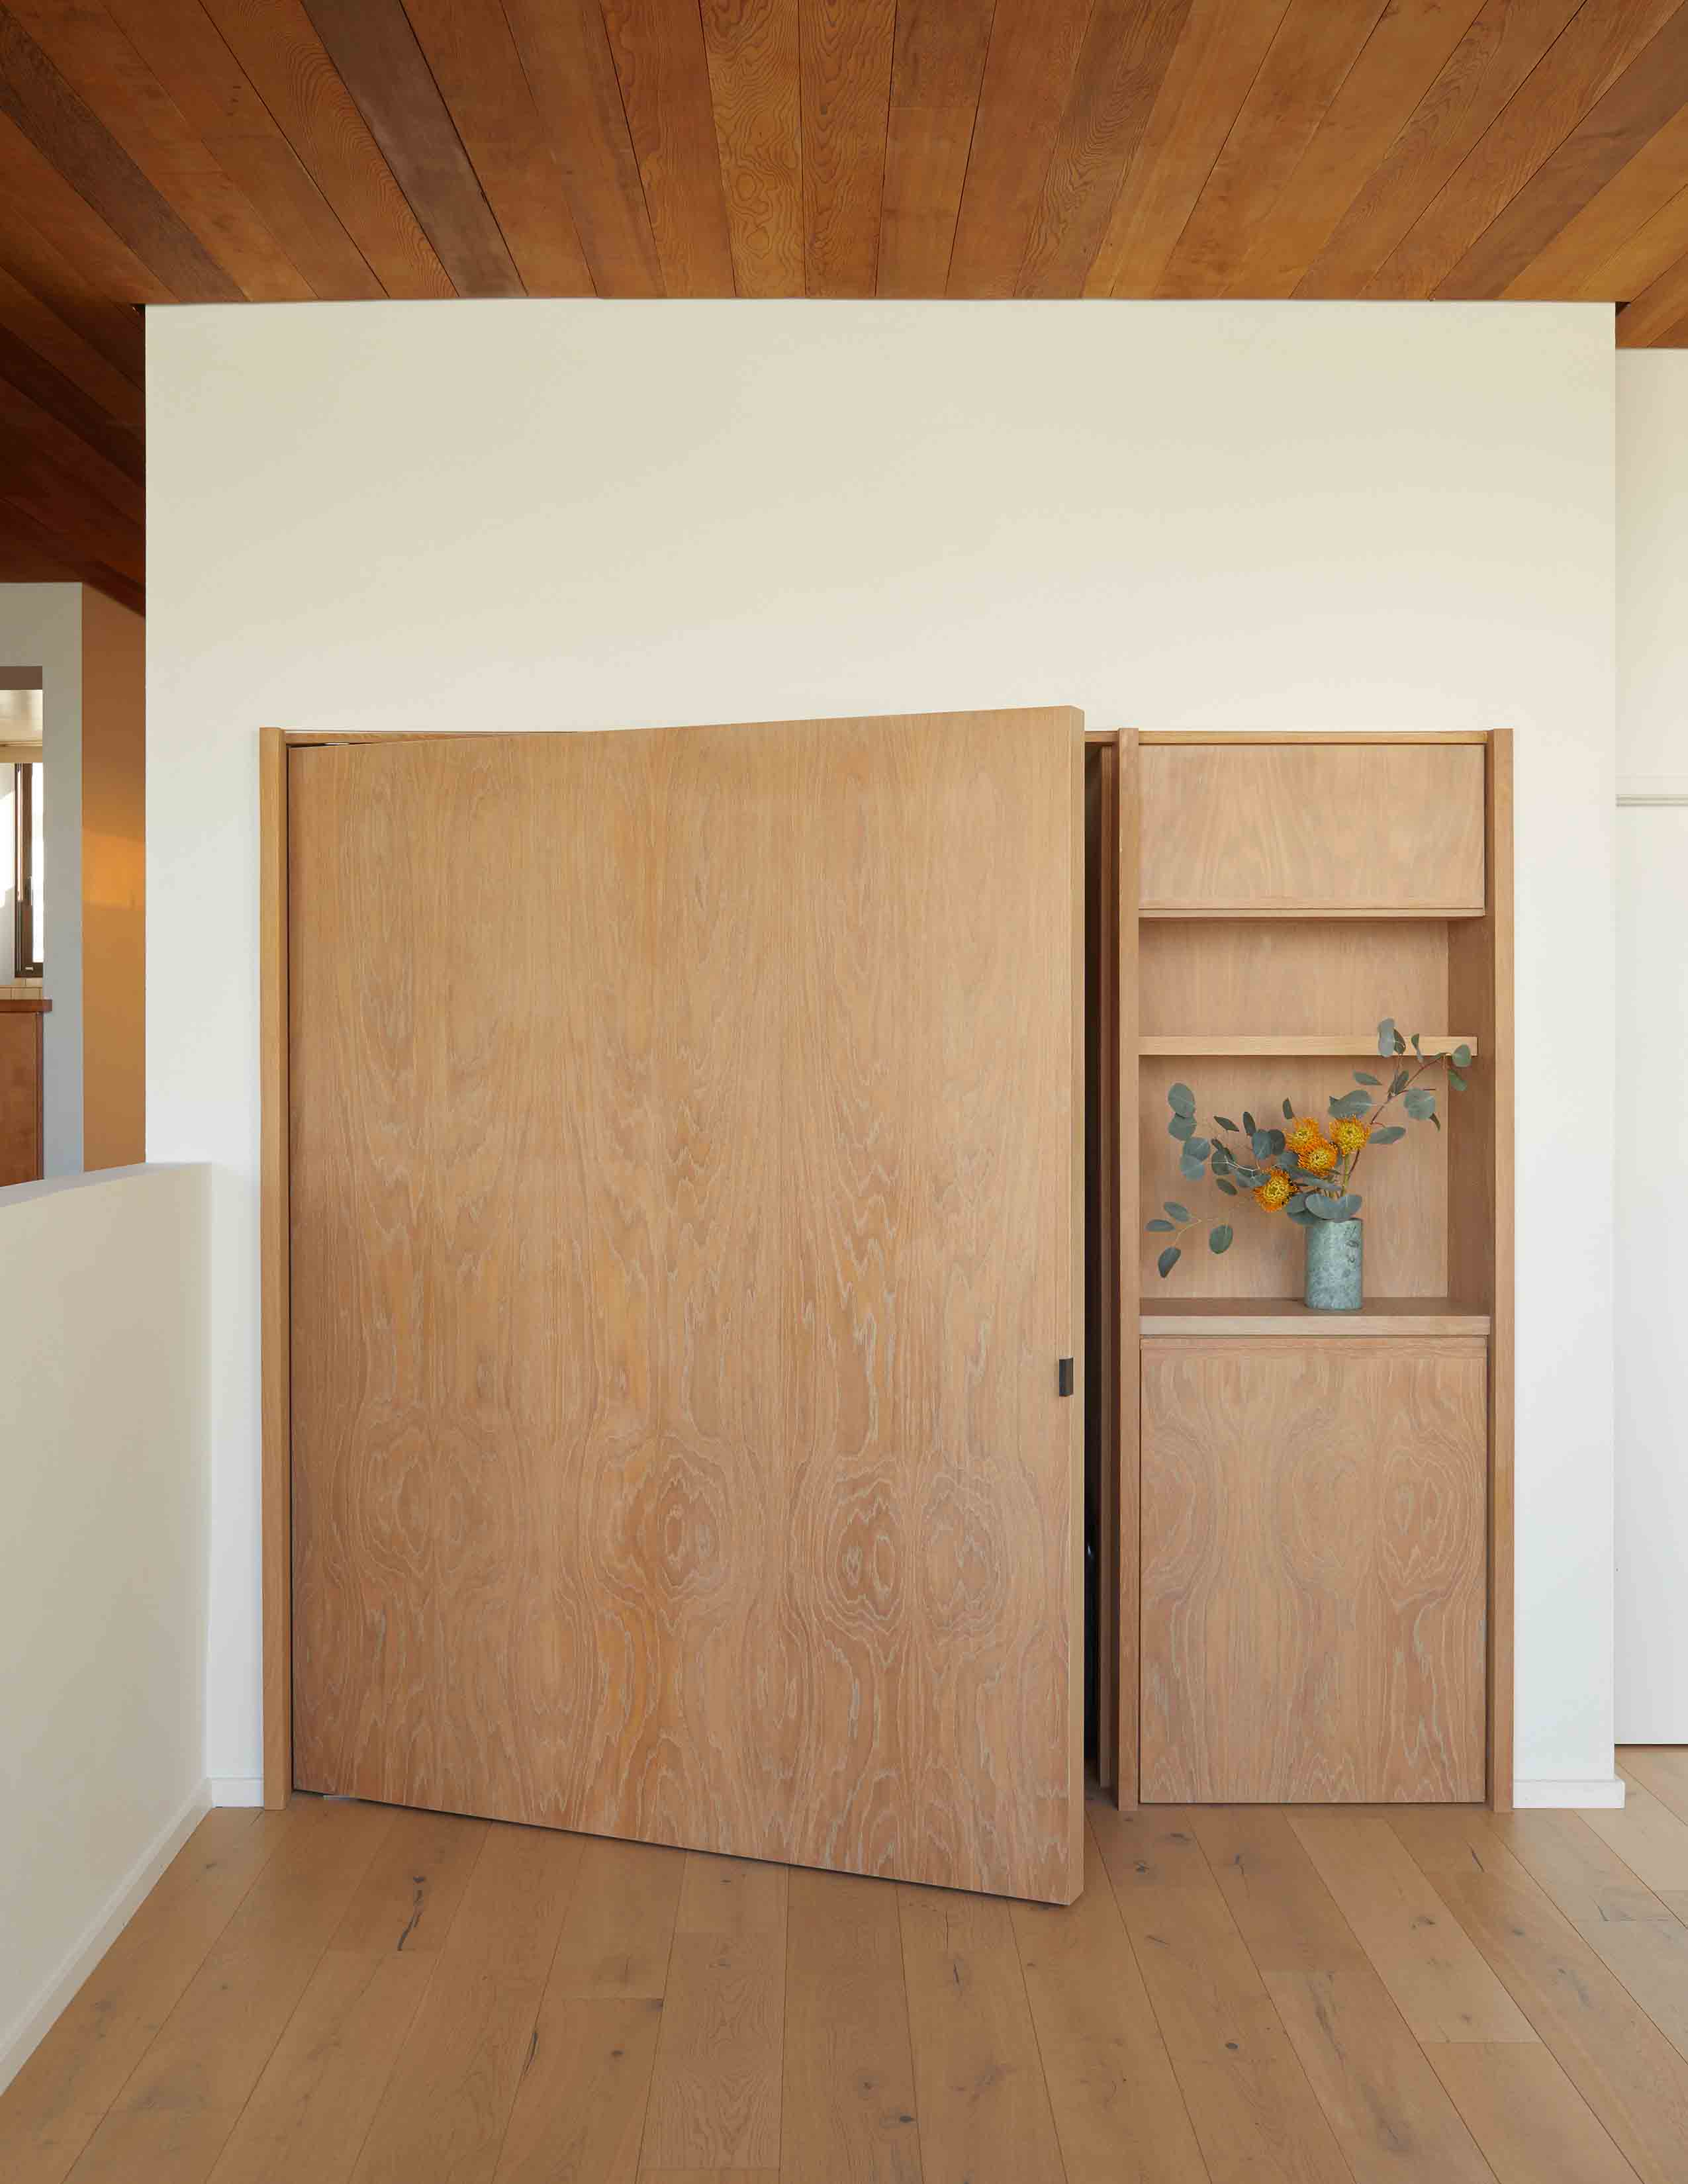 Fold-out-bed-pivot-door-design-by-Nabi-Boyd,-built-by-MANEUVERWORK,-photographed-by-Cody-James-with-FritsJurgens-System-One-1.jpg